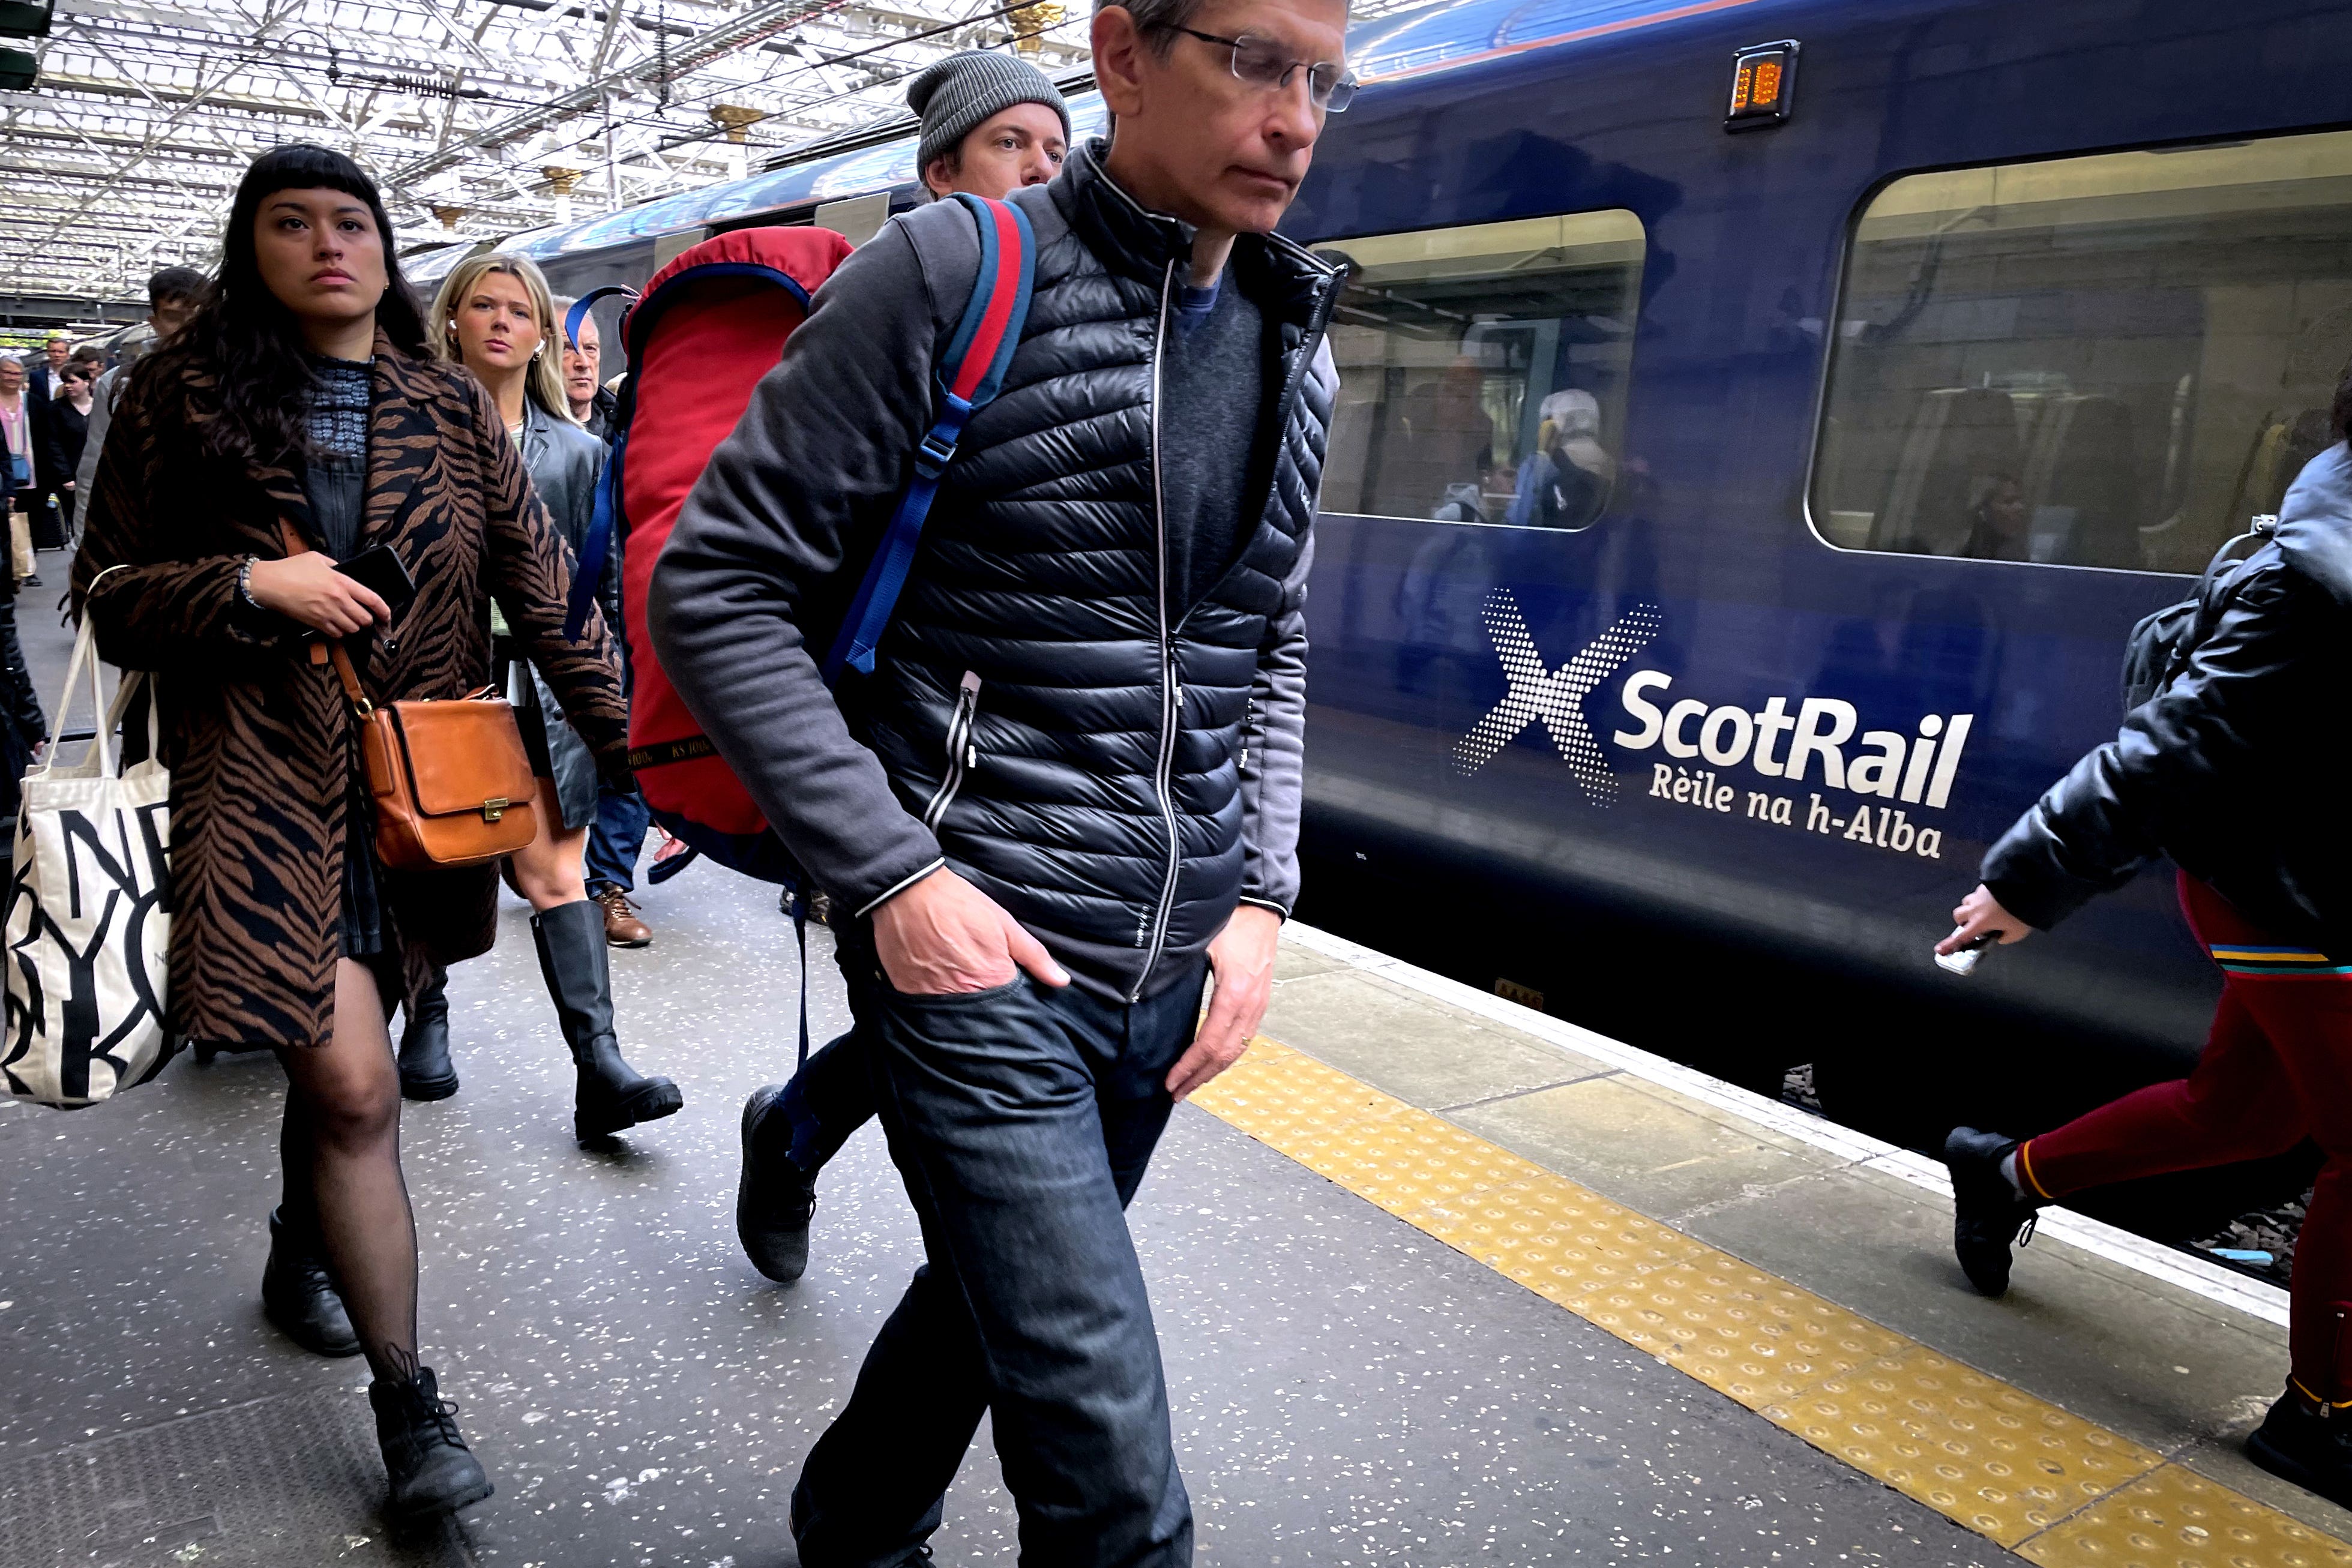 Commuters and travellers at Edinburgh’s Waverley Station (Jane Barlow/PA)